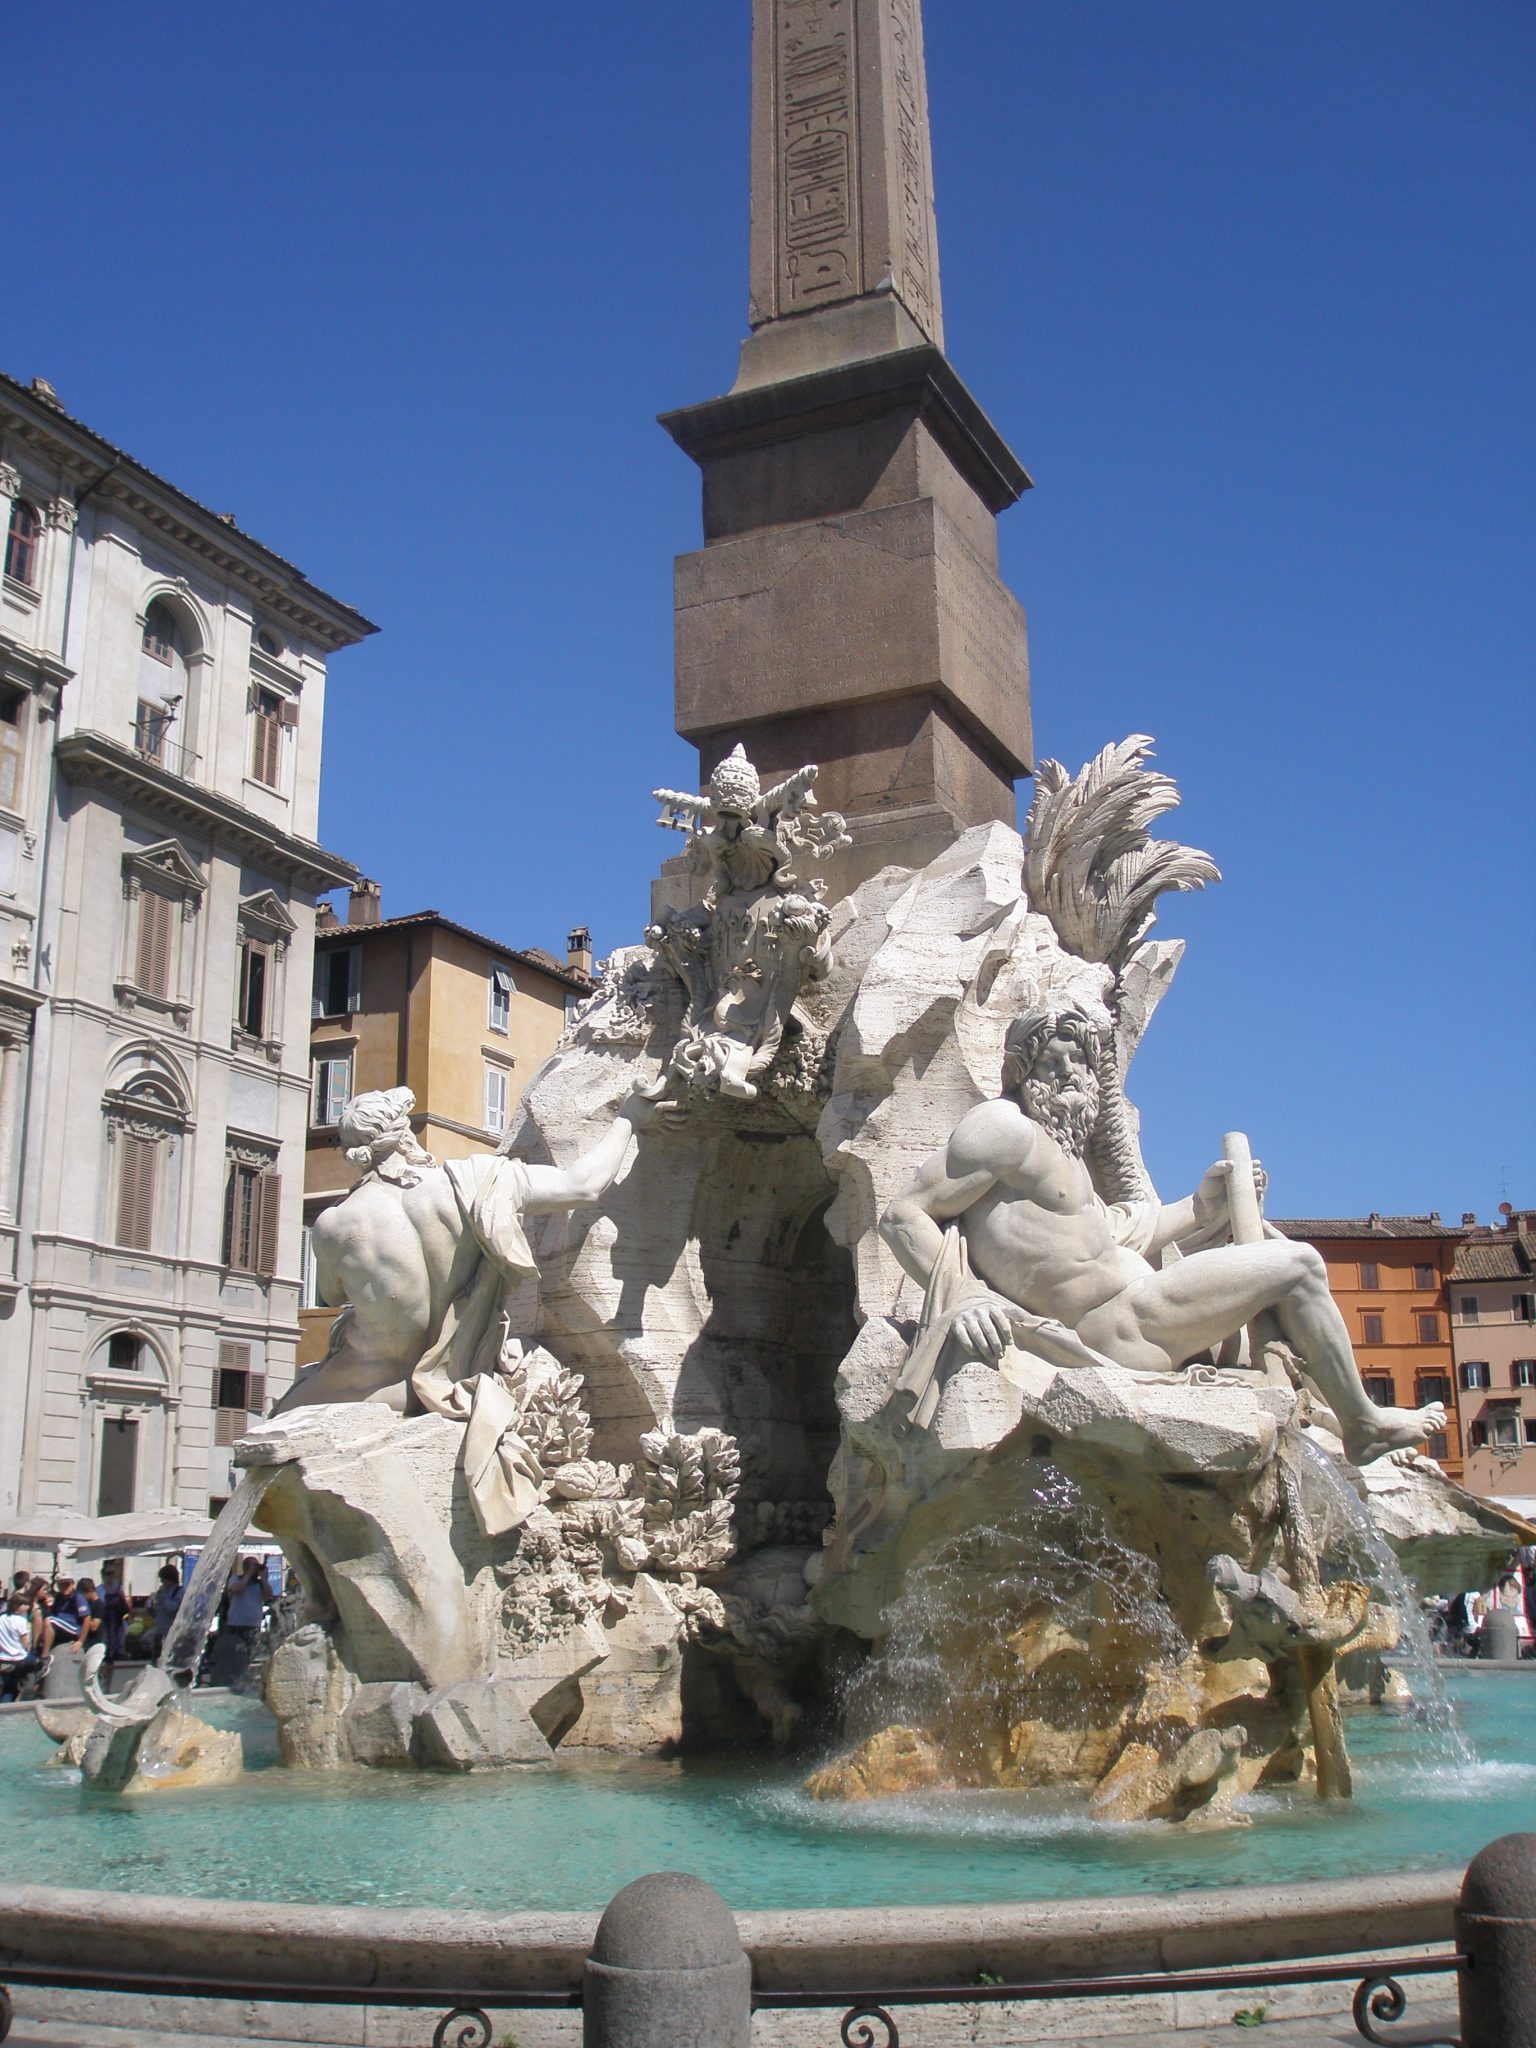 Fontana dei Quattro Fiumi (Fountain of the Four Rivers). Completed in 1651, by Gian Lorenzo Bernini, and his assistants. I took this photo on a postcard-sunny day, in June of 2011.